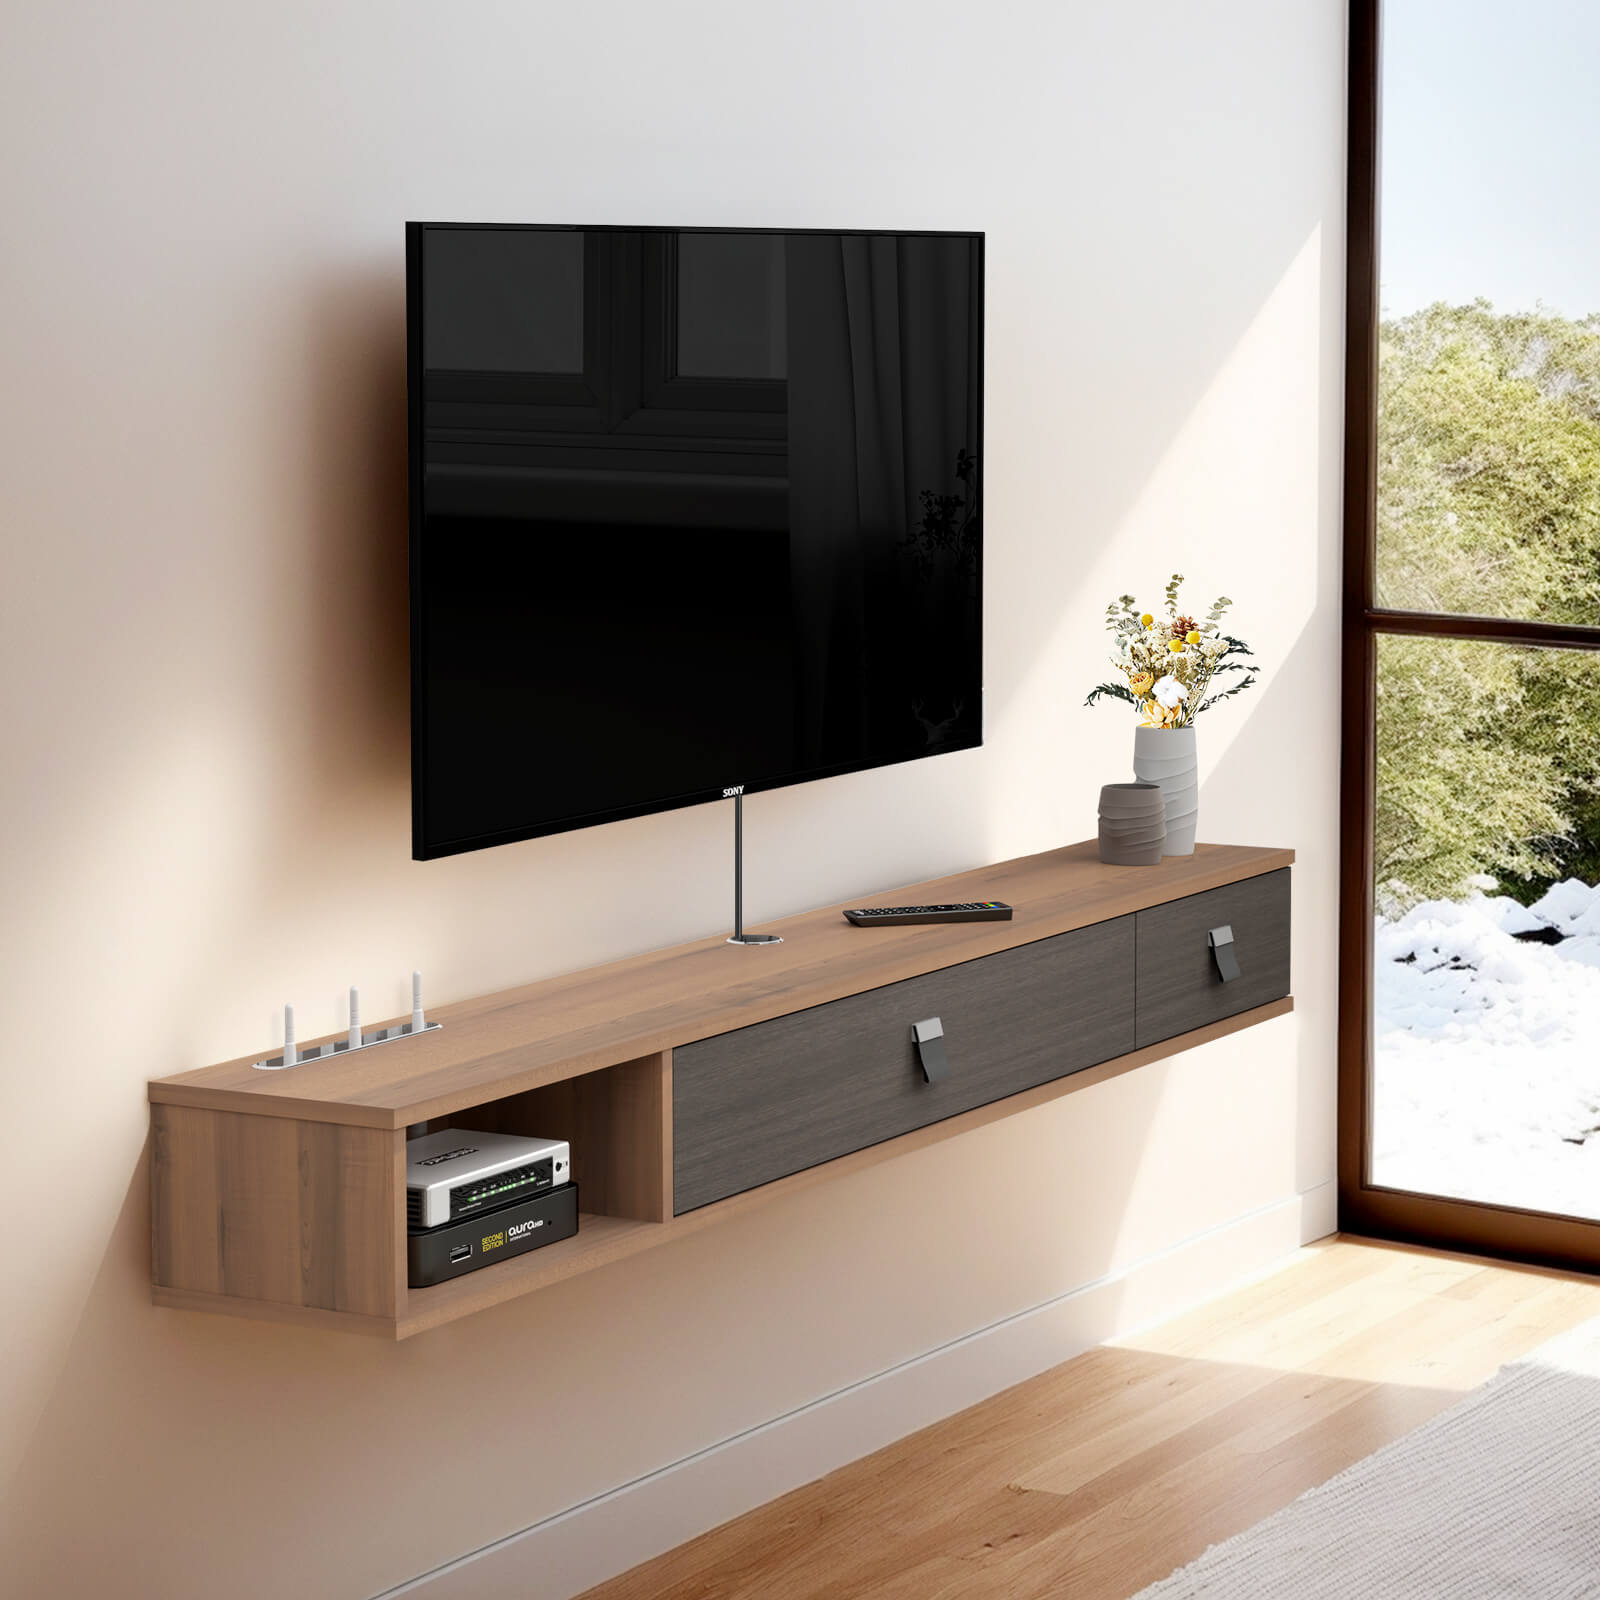 70.86" Plywood Floating TV Stand Wall Shelf with Two Doors for 75" 80" Televisions, Walnut